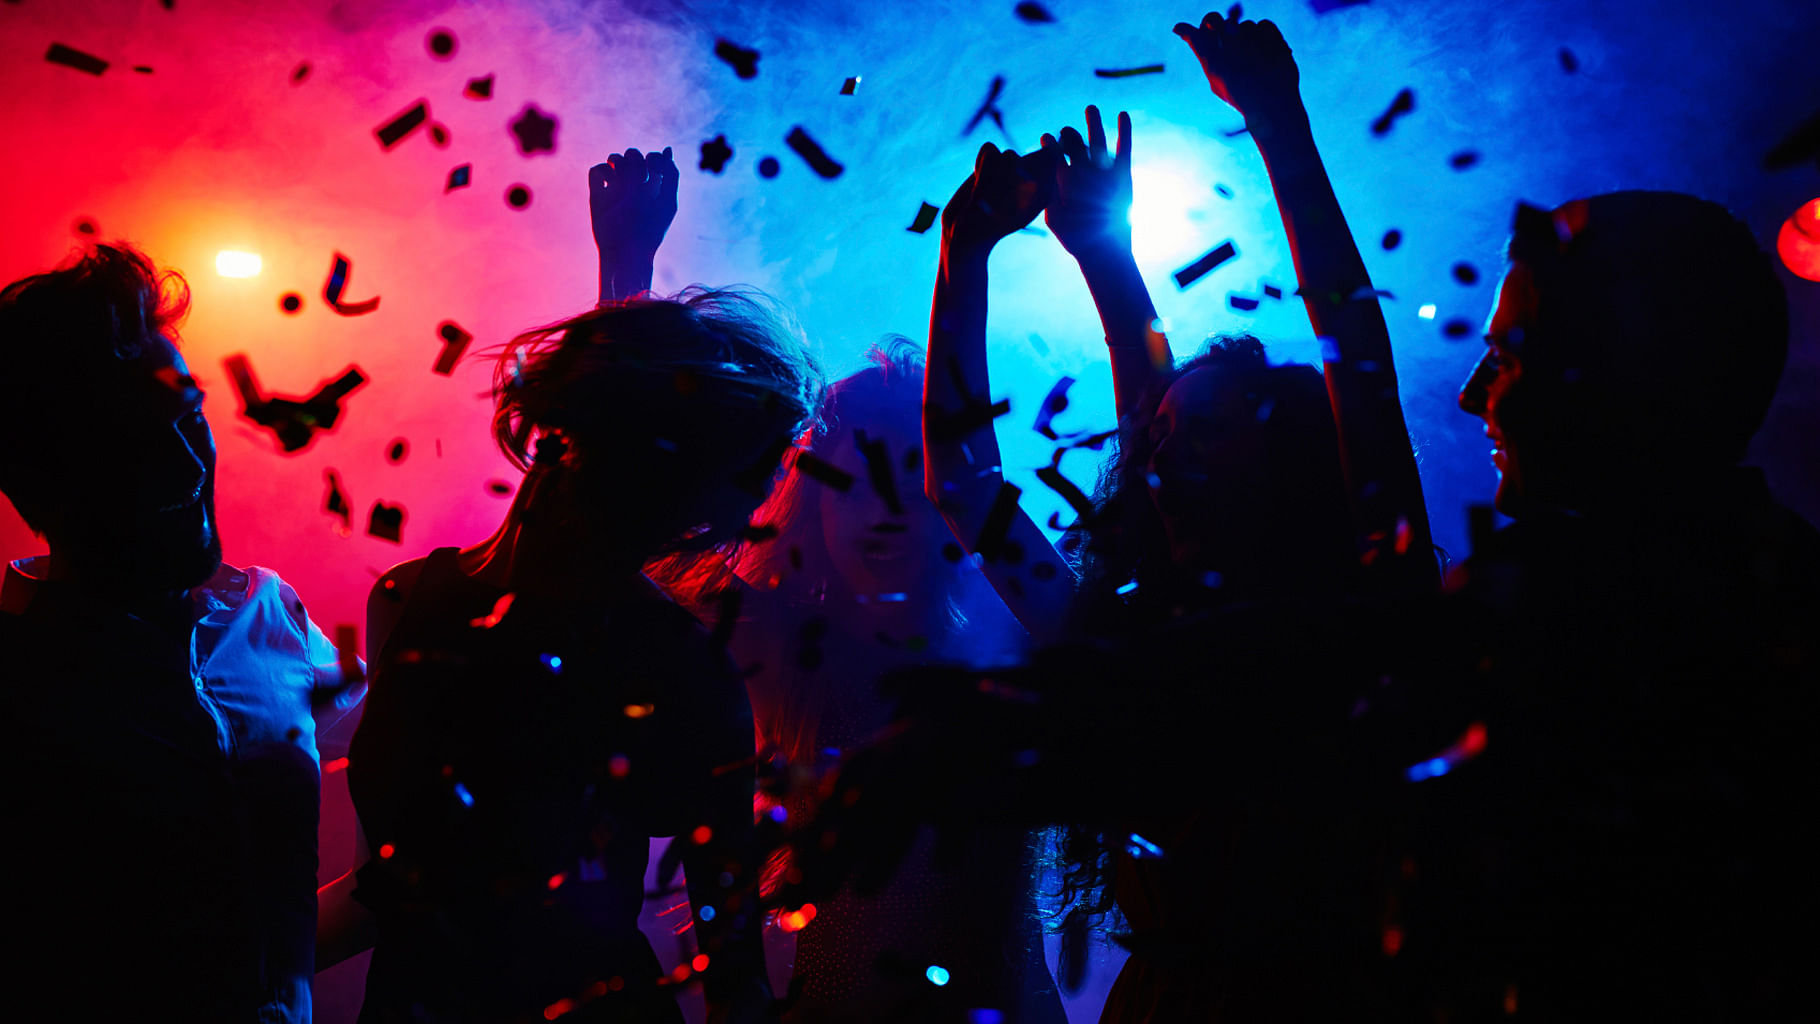 

Discotheques have been added to the list of places that are breeding grounds for anti-national elements. (Photo: iStockphoto)